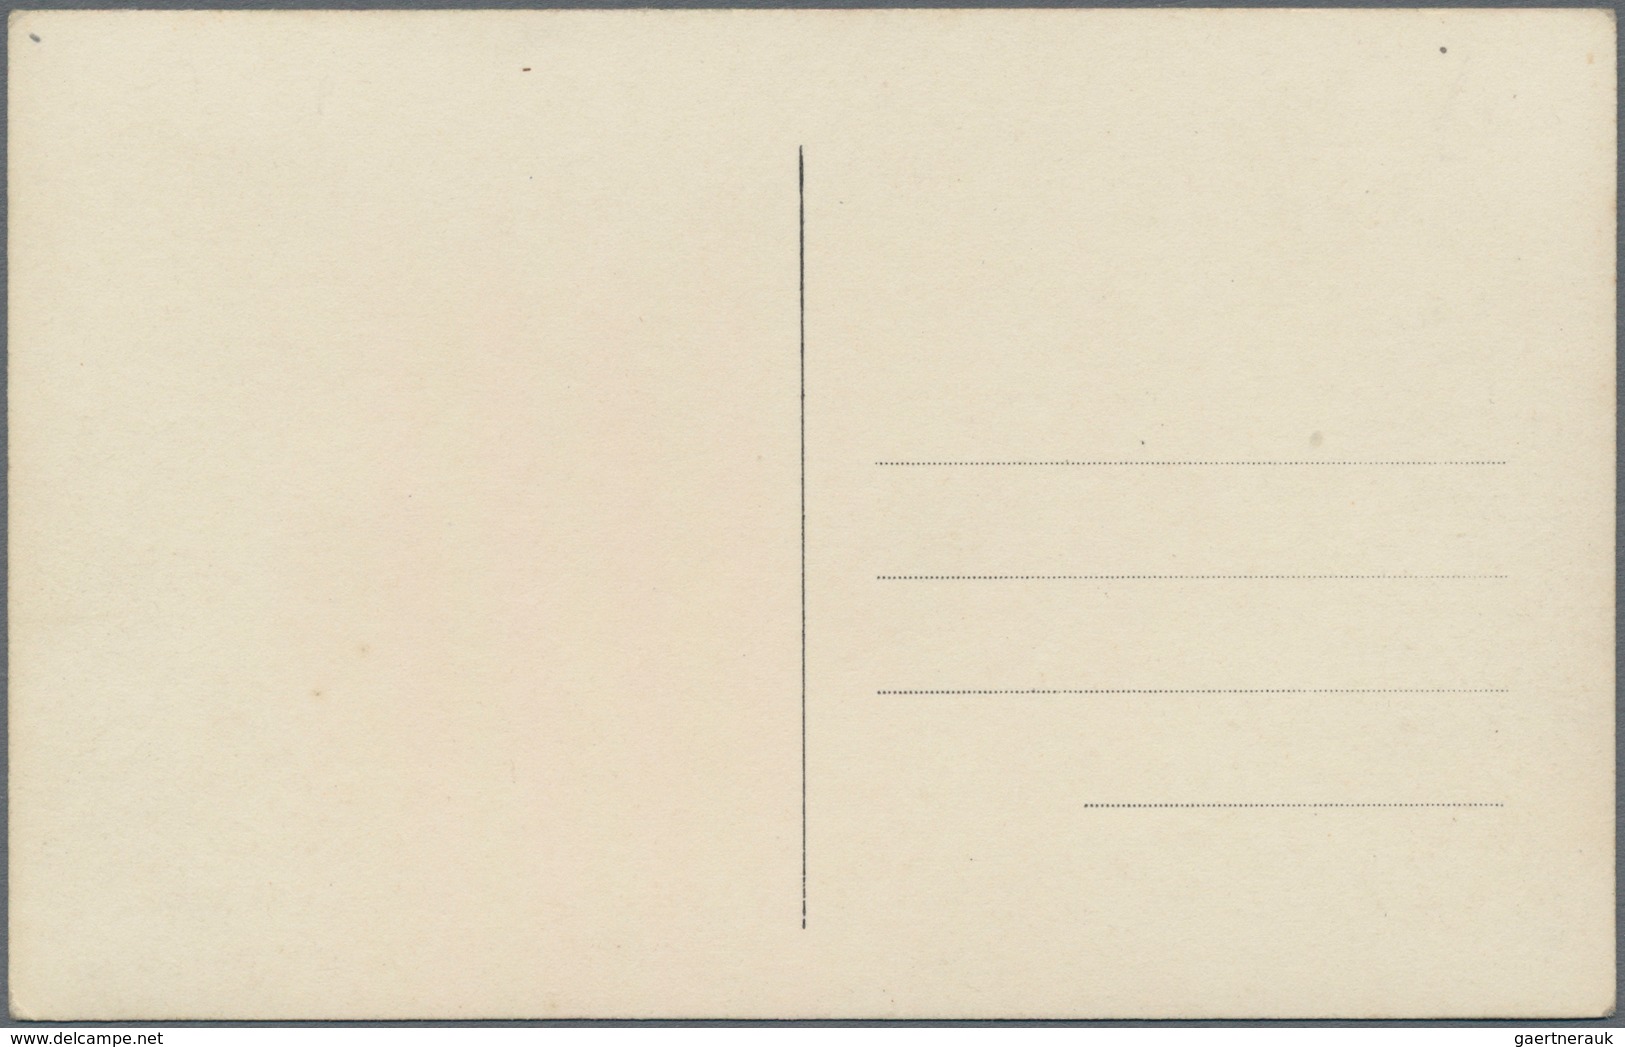 Curacao: 1917, 12 1/2 C blue postal stationery envelope, uprated with 10 C rose, sent registered fro